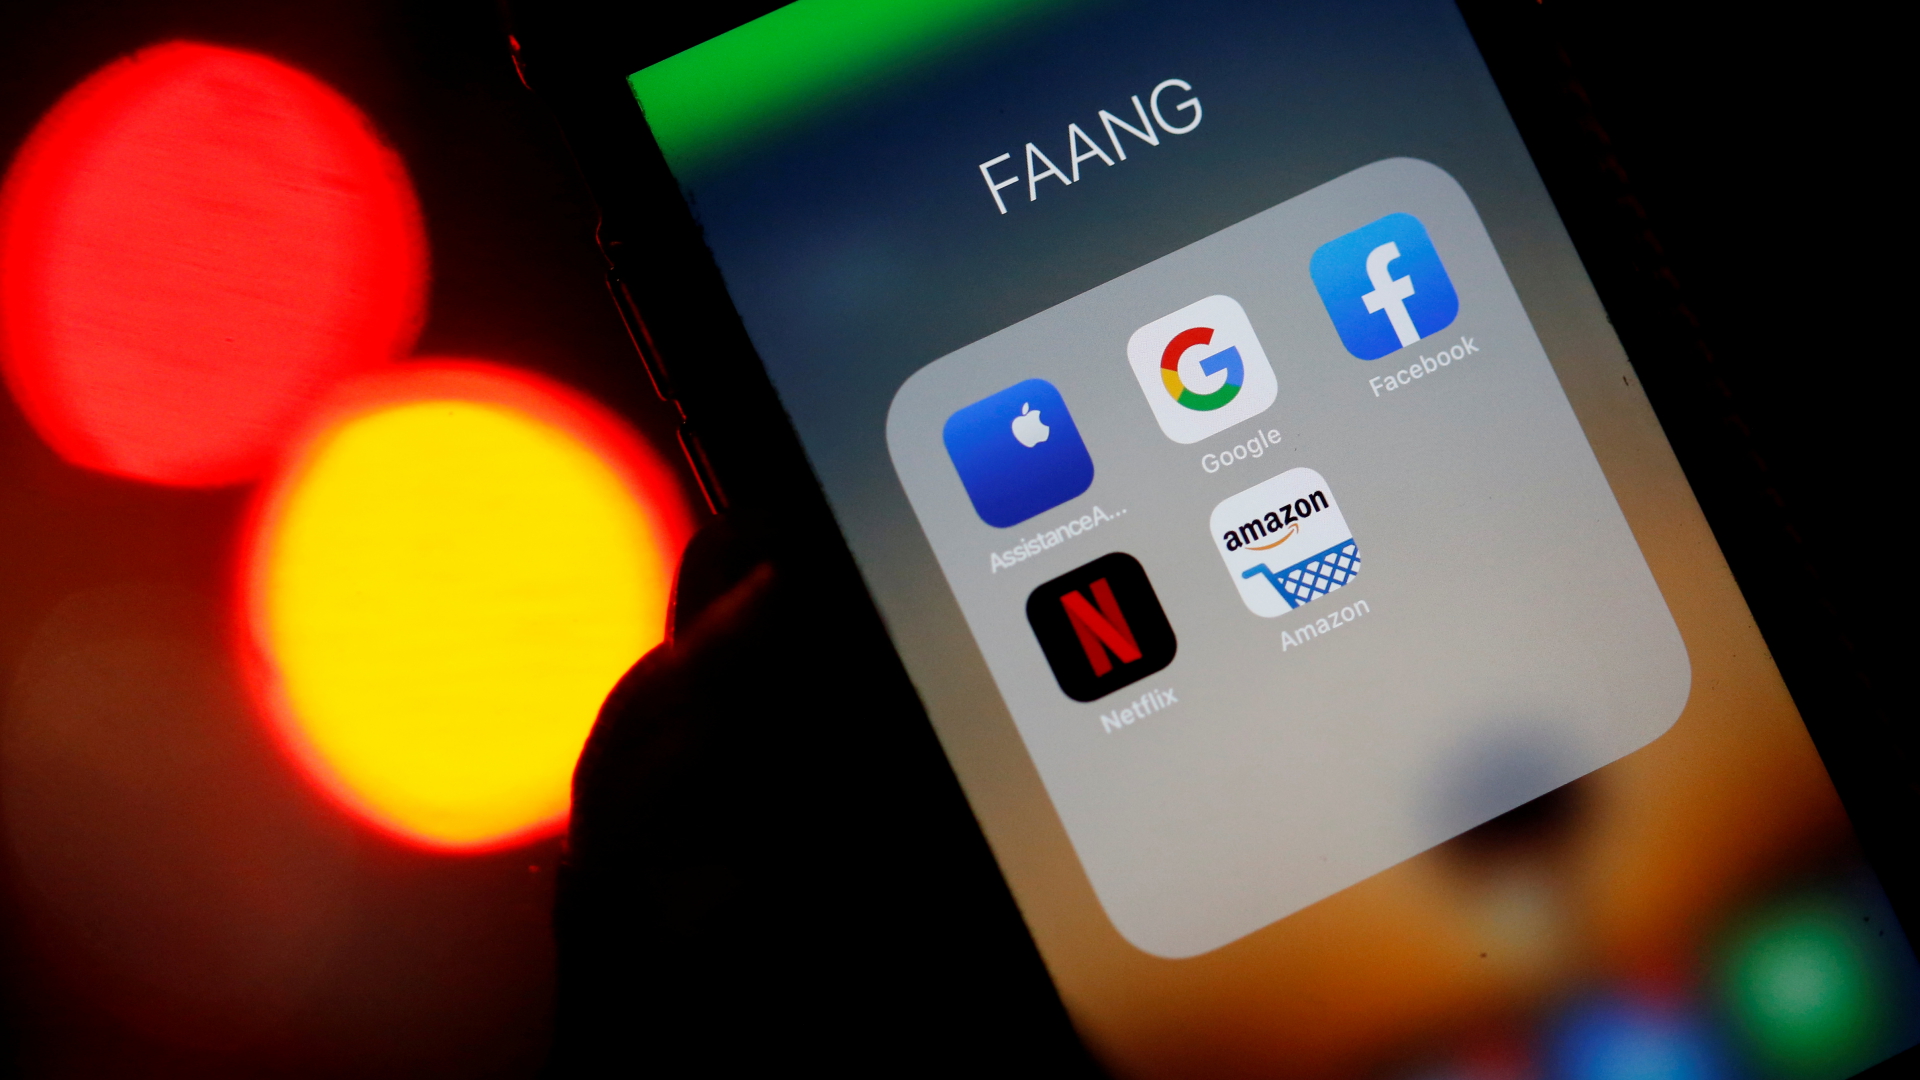 The icons of several apps such as Google, Amazon or Facebook can be seen on a mobile phone. | REUTERS